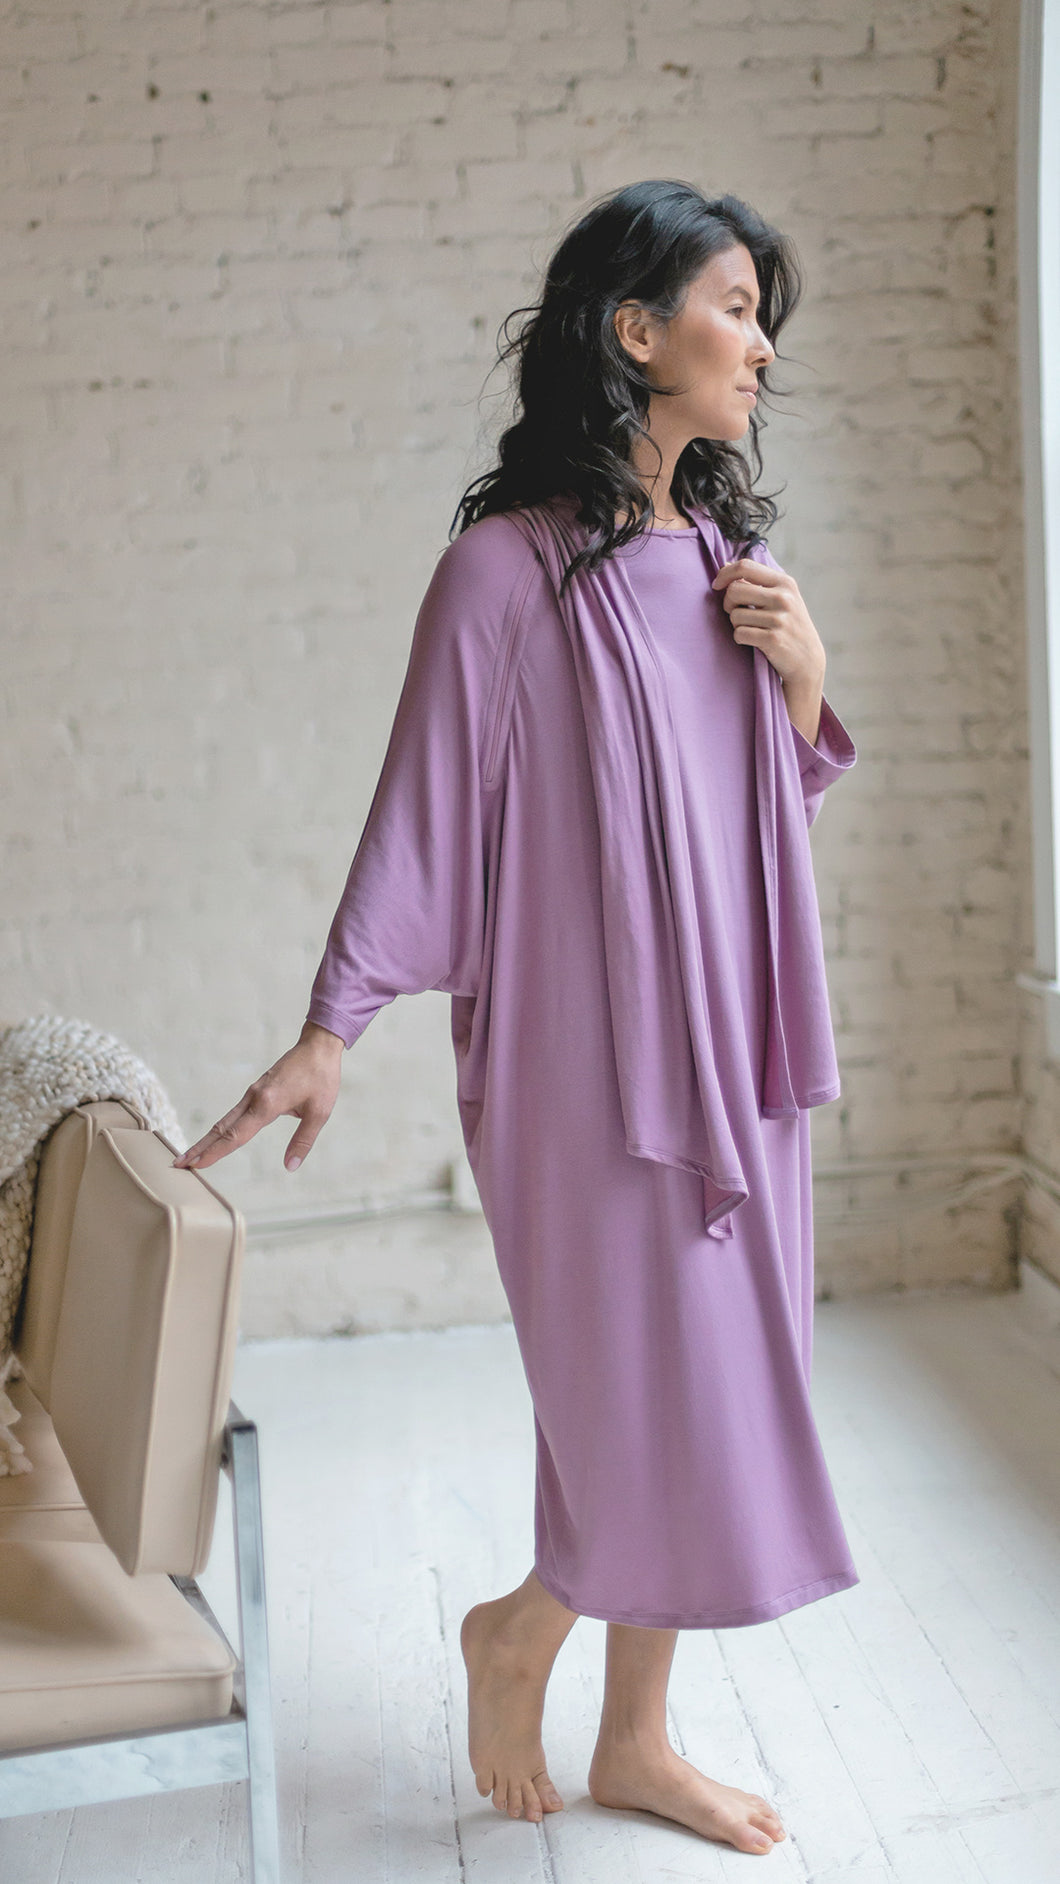 Woman wearing patient hospital gown in lilac modal fabric standing